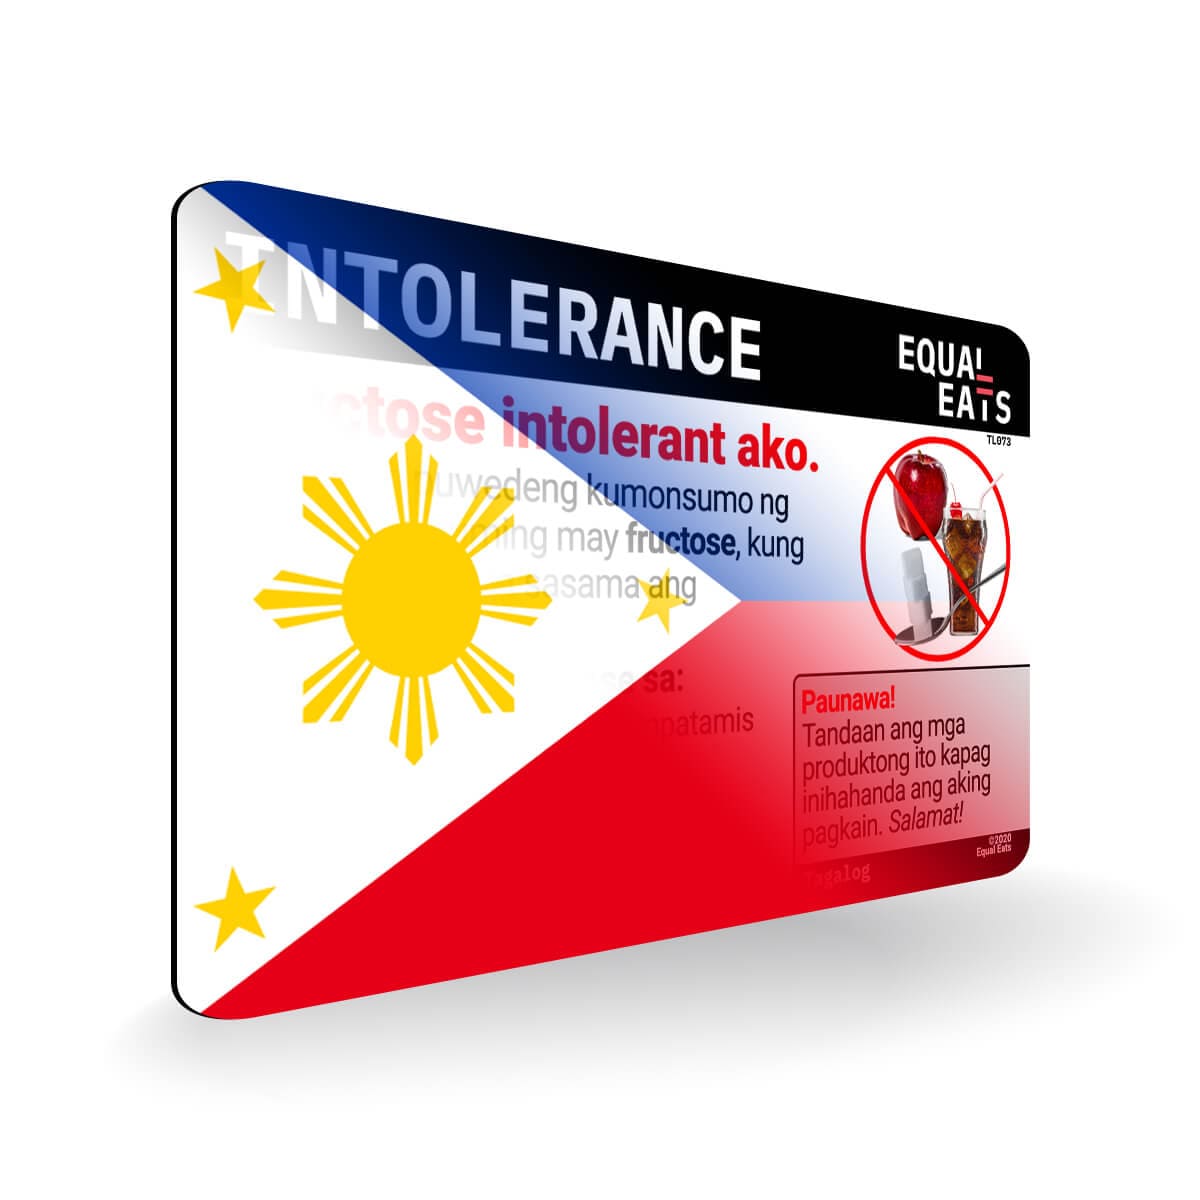 Fructose Intolerance in Tagalog. Fructose Intolerant Card for Philippines